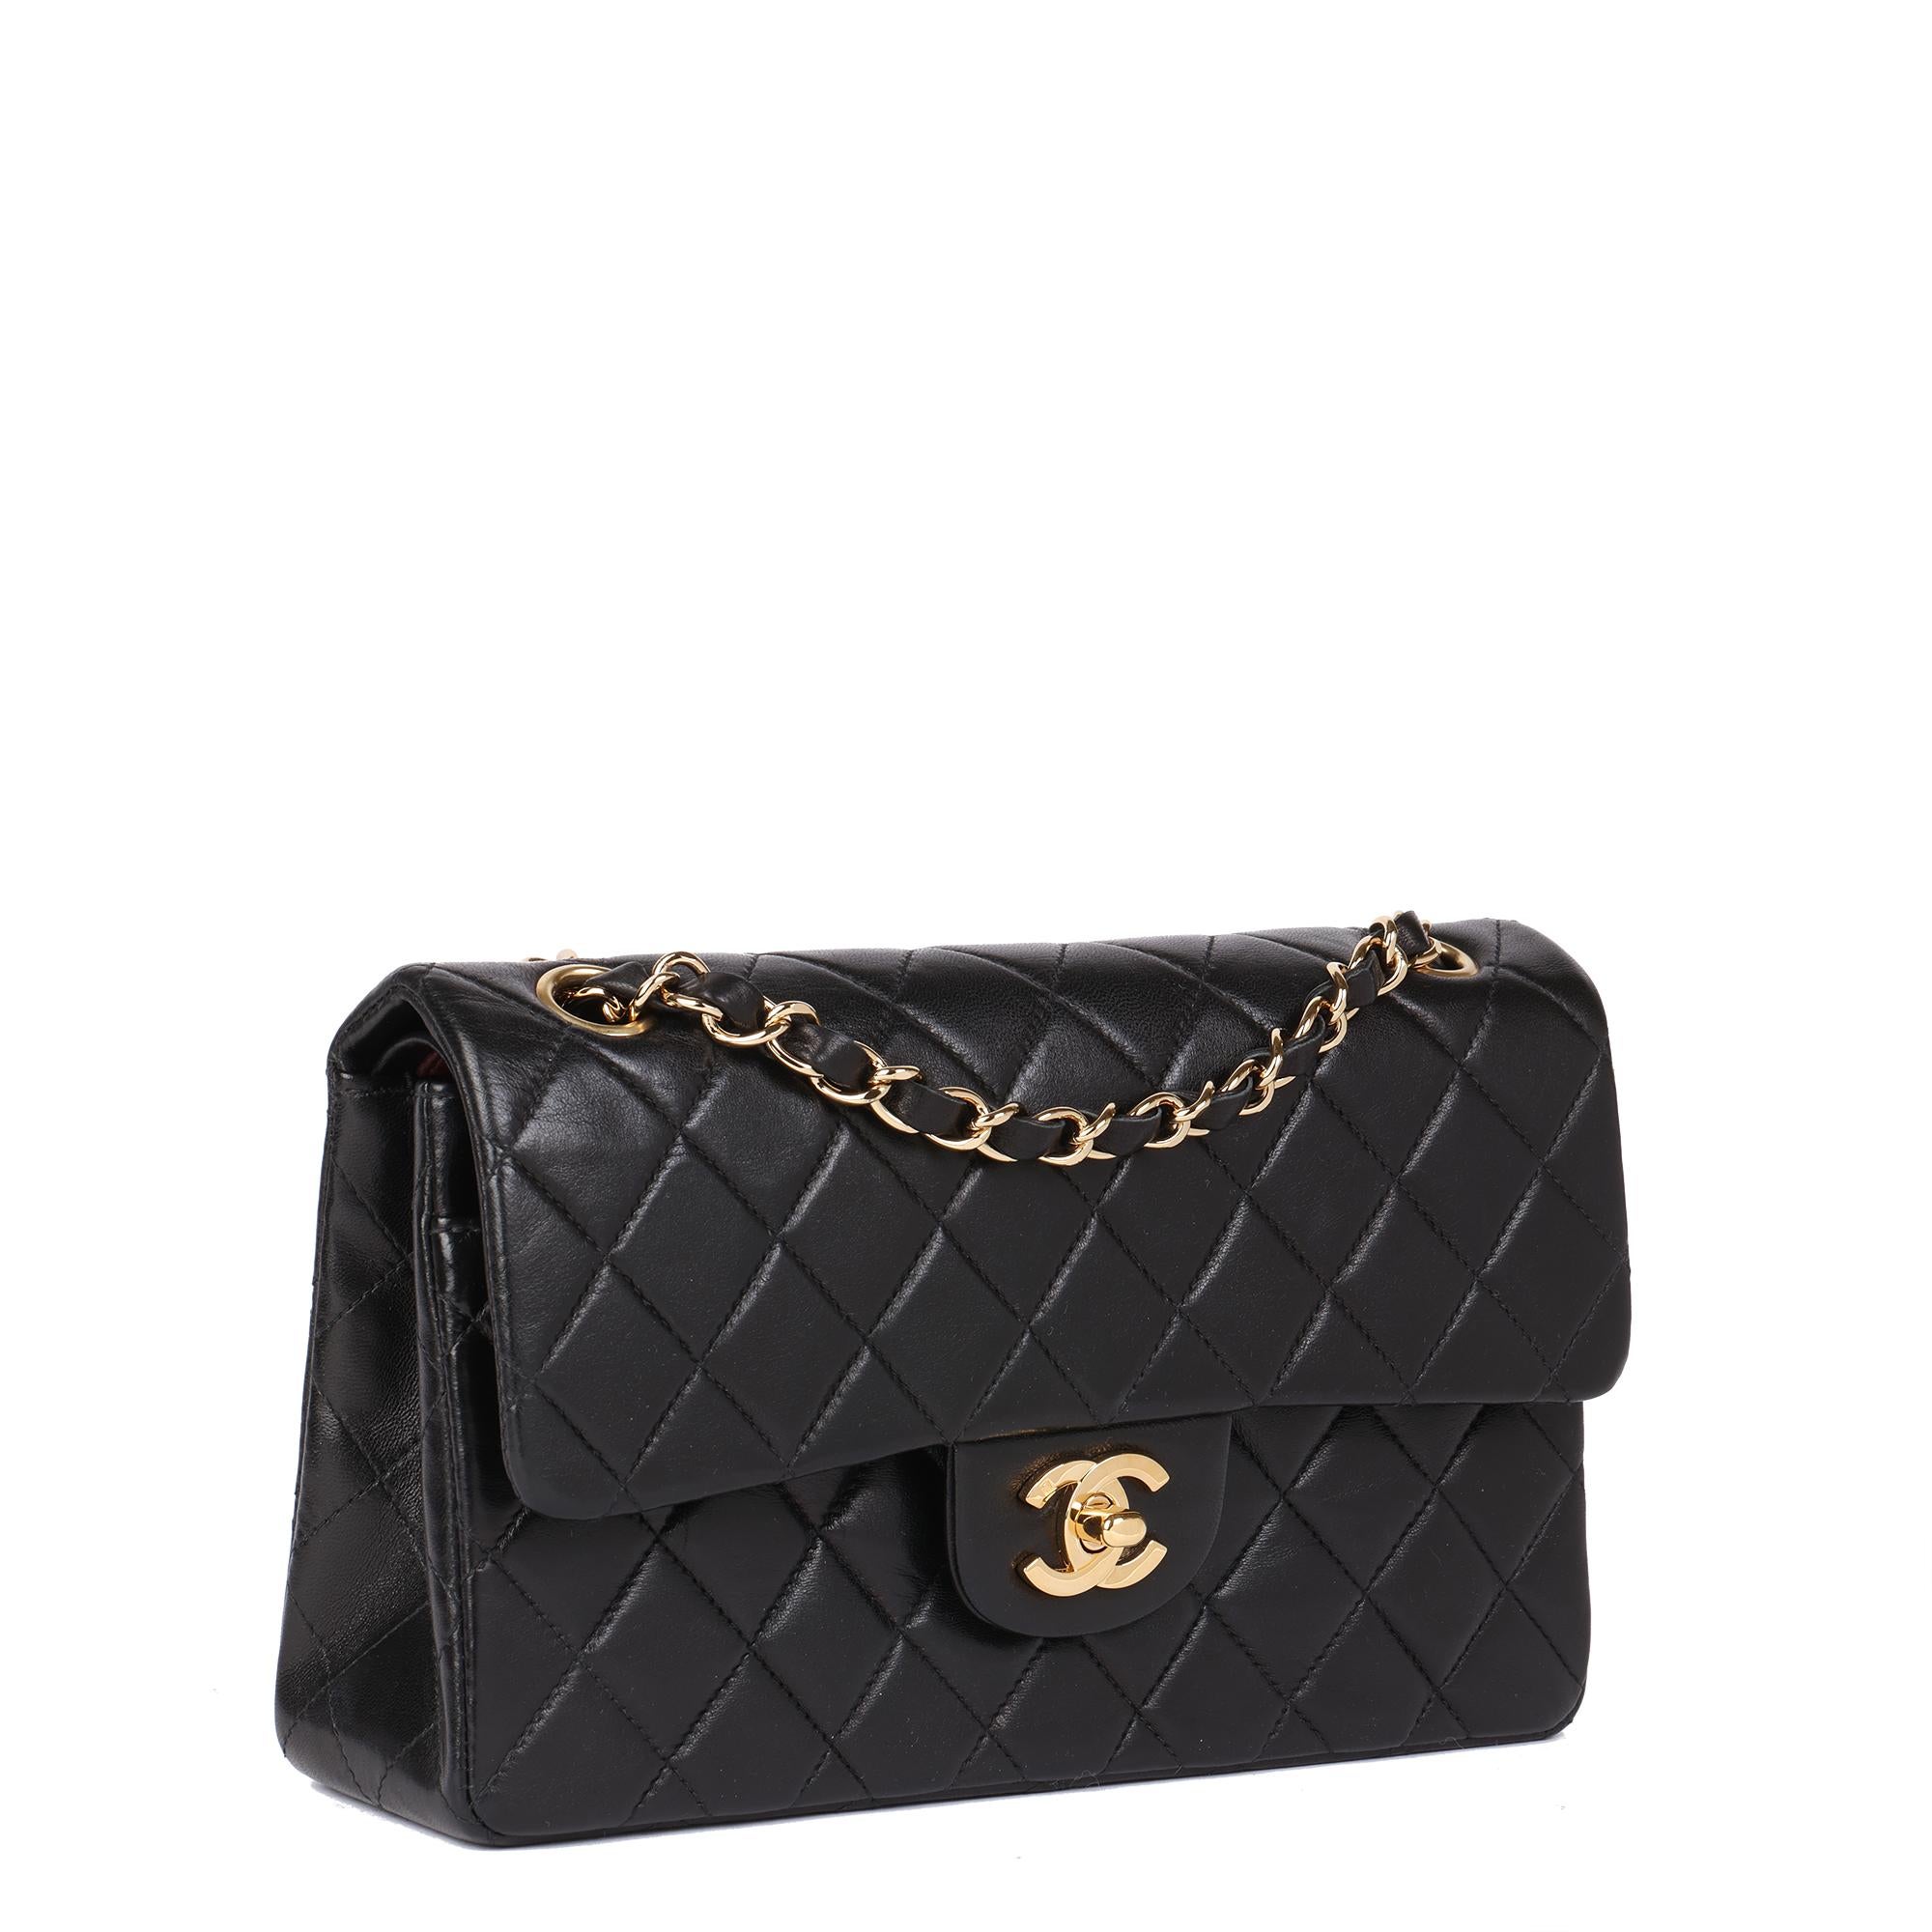 CHANEL
Black Quilted Lambskin Small Classic Double Flap Bag

Xupes Reference: HB4890
Serial Number: 8370514
Age (Circa): 2003
Accompanied By: Chanel Dust Bag, Authenticity Card, Care Booklet
Authenticity Details: Authenticity Card, Serial Sticker